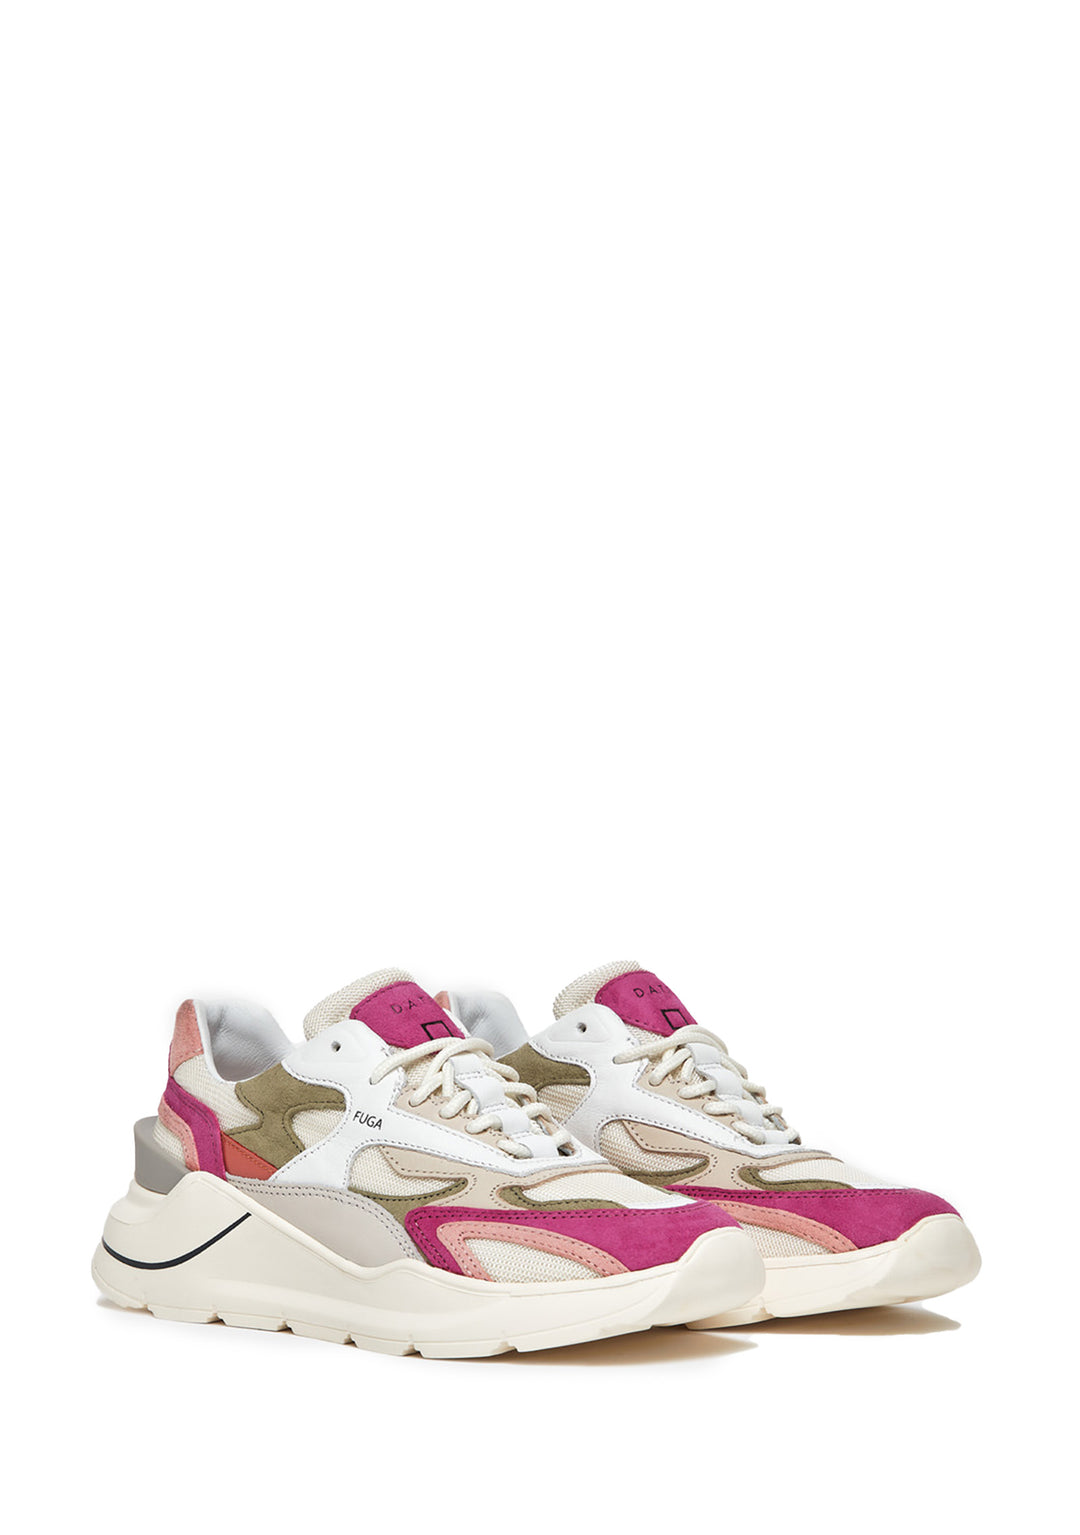 SNEAKERS DONNA Bianco D.a.t.e.